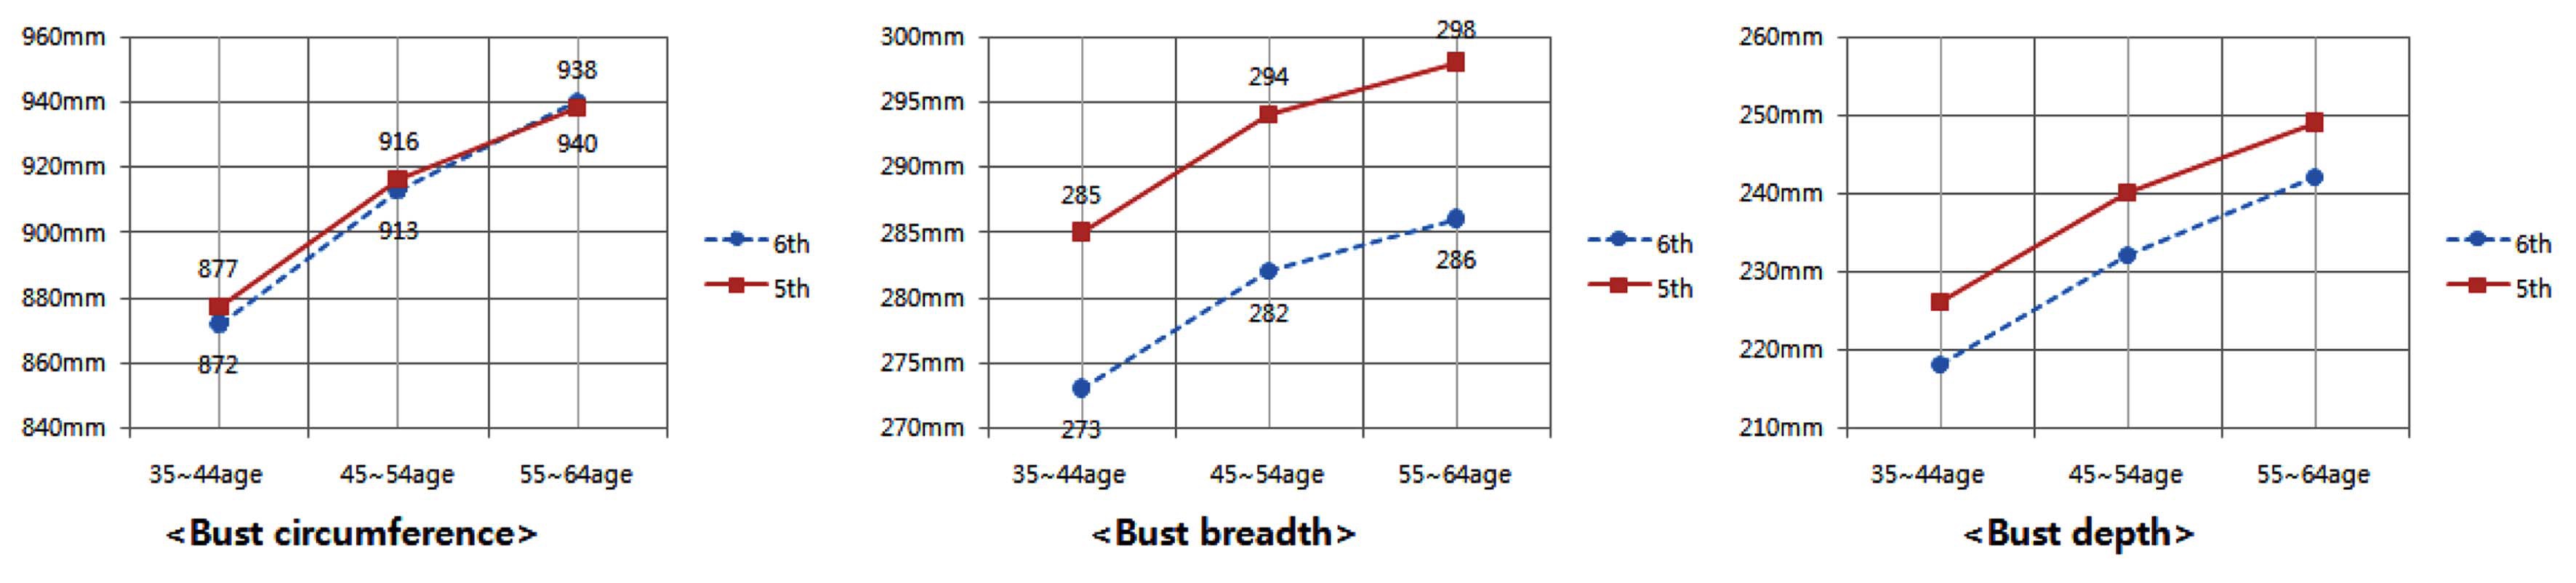 The trend changes according to the age and year of measurement regarding bust-related Items.